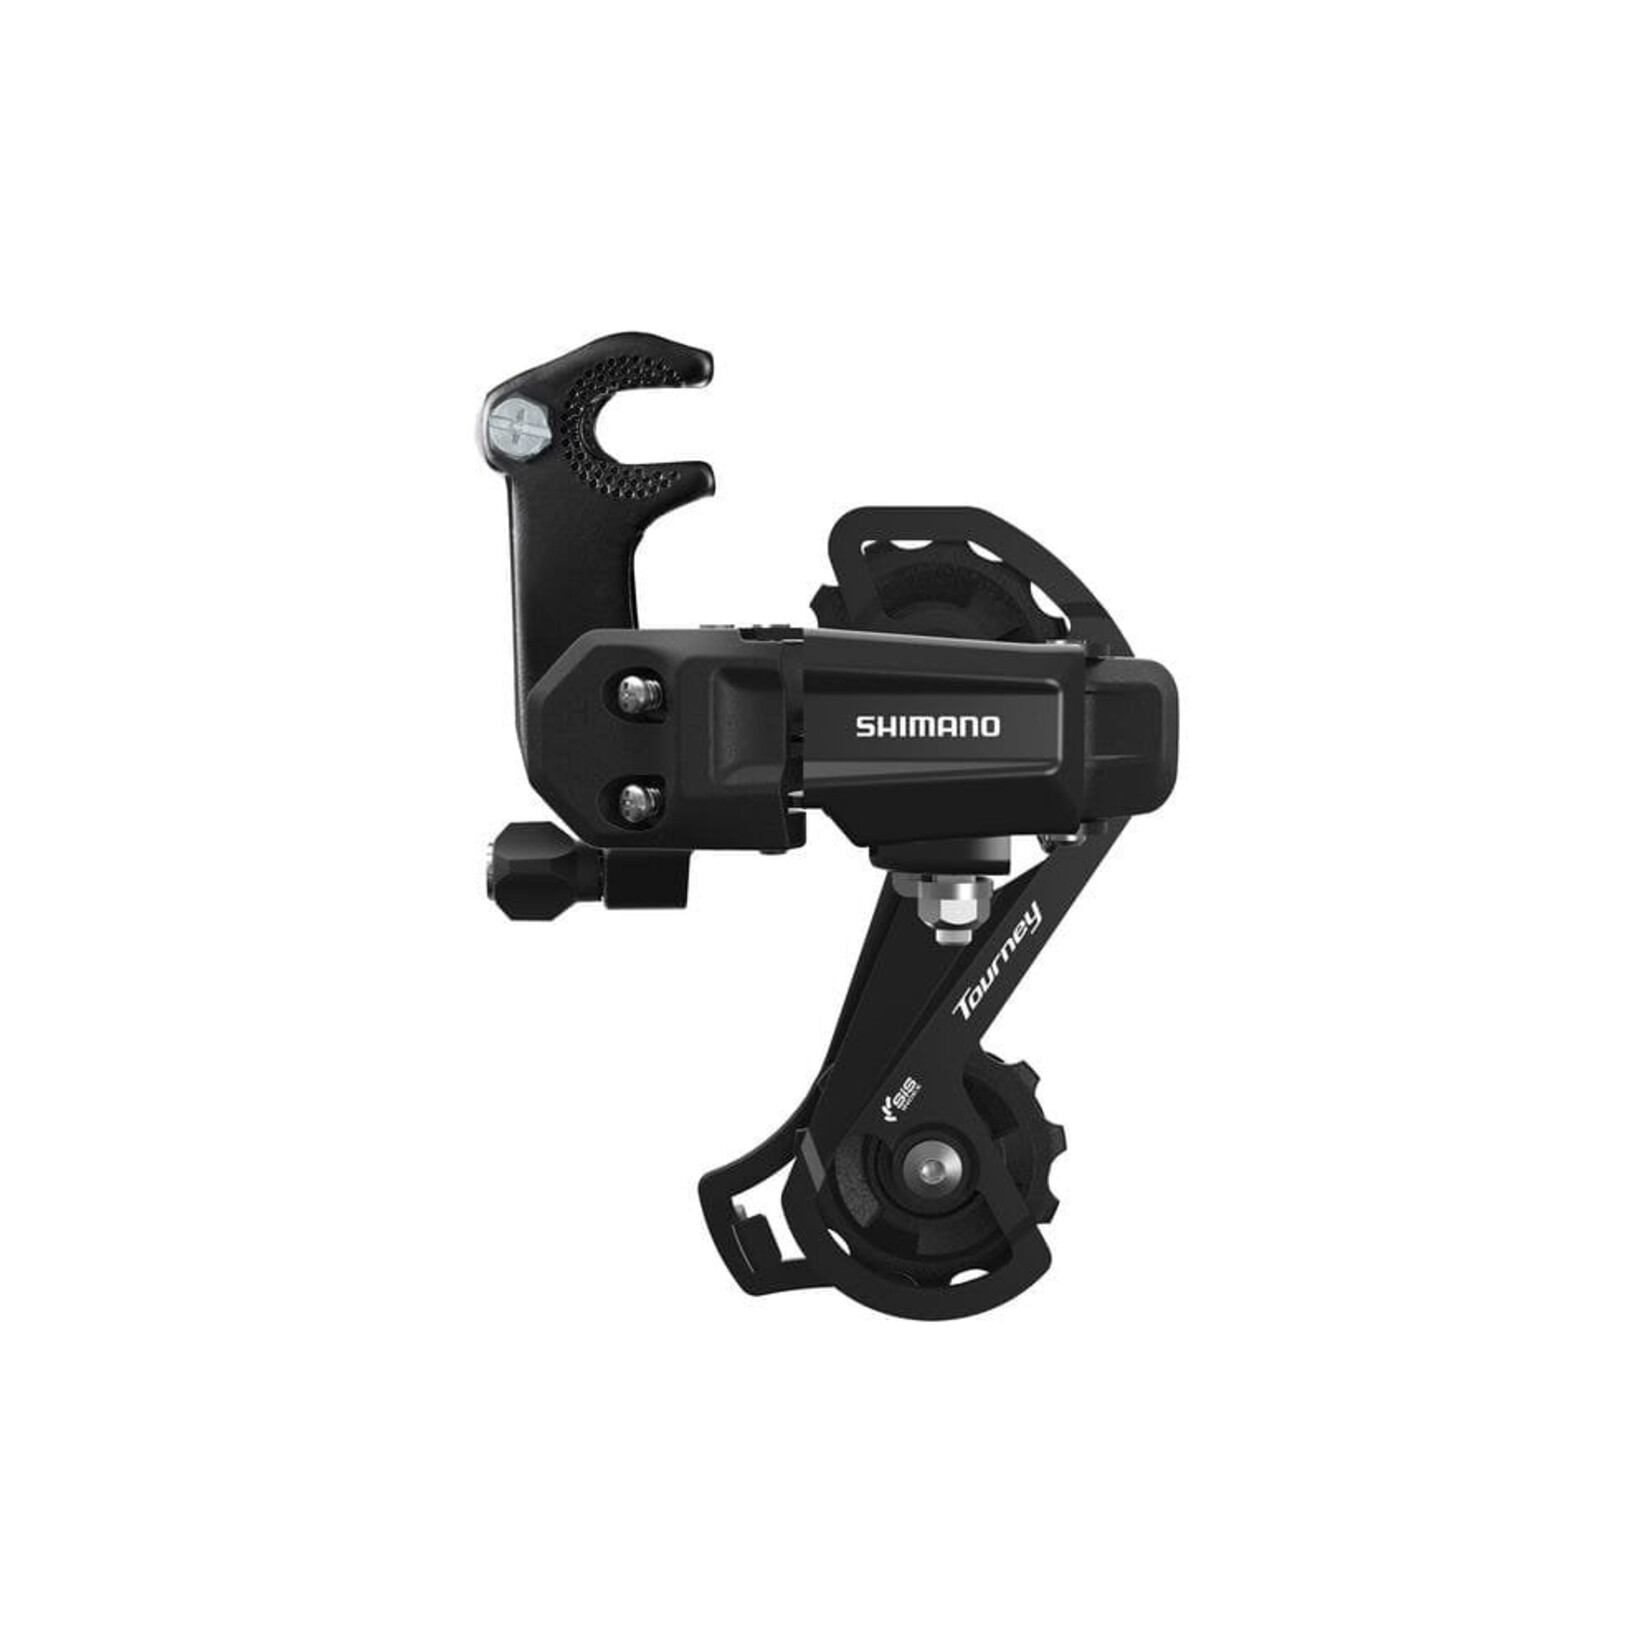 Shimano Tourney / TY Tourney TY200 rear derailleur, 6/7-speed, with bracket, GS medium cage